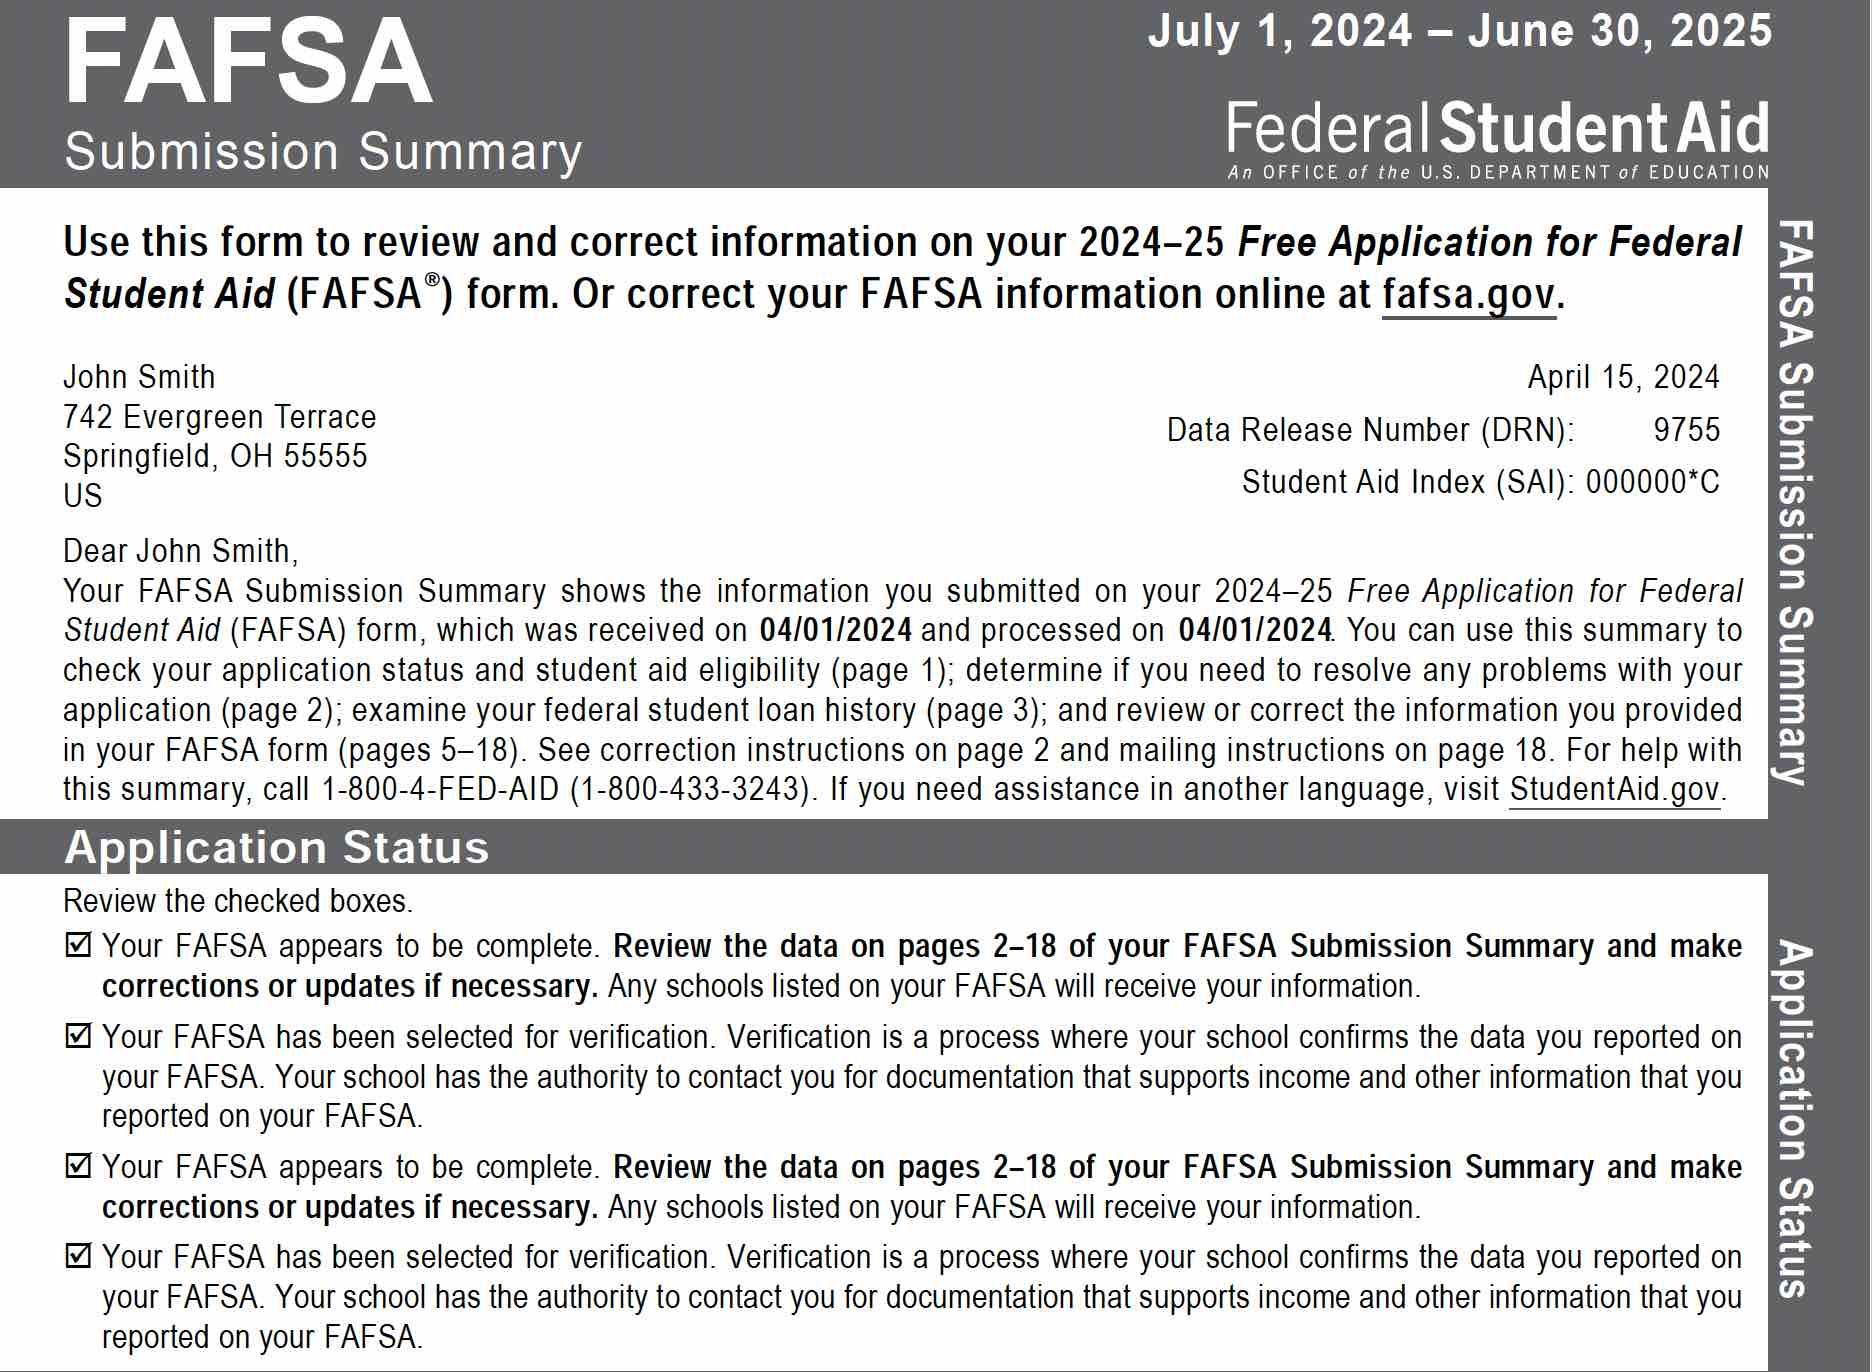 FAFSA Submission Summary Form